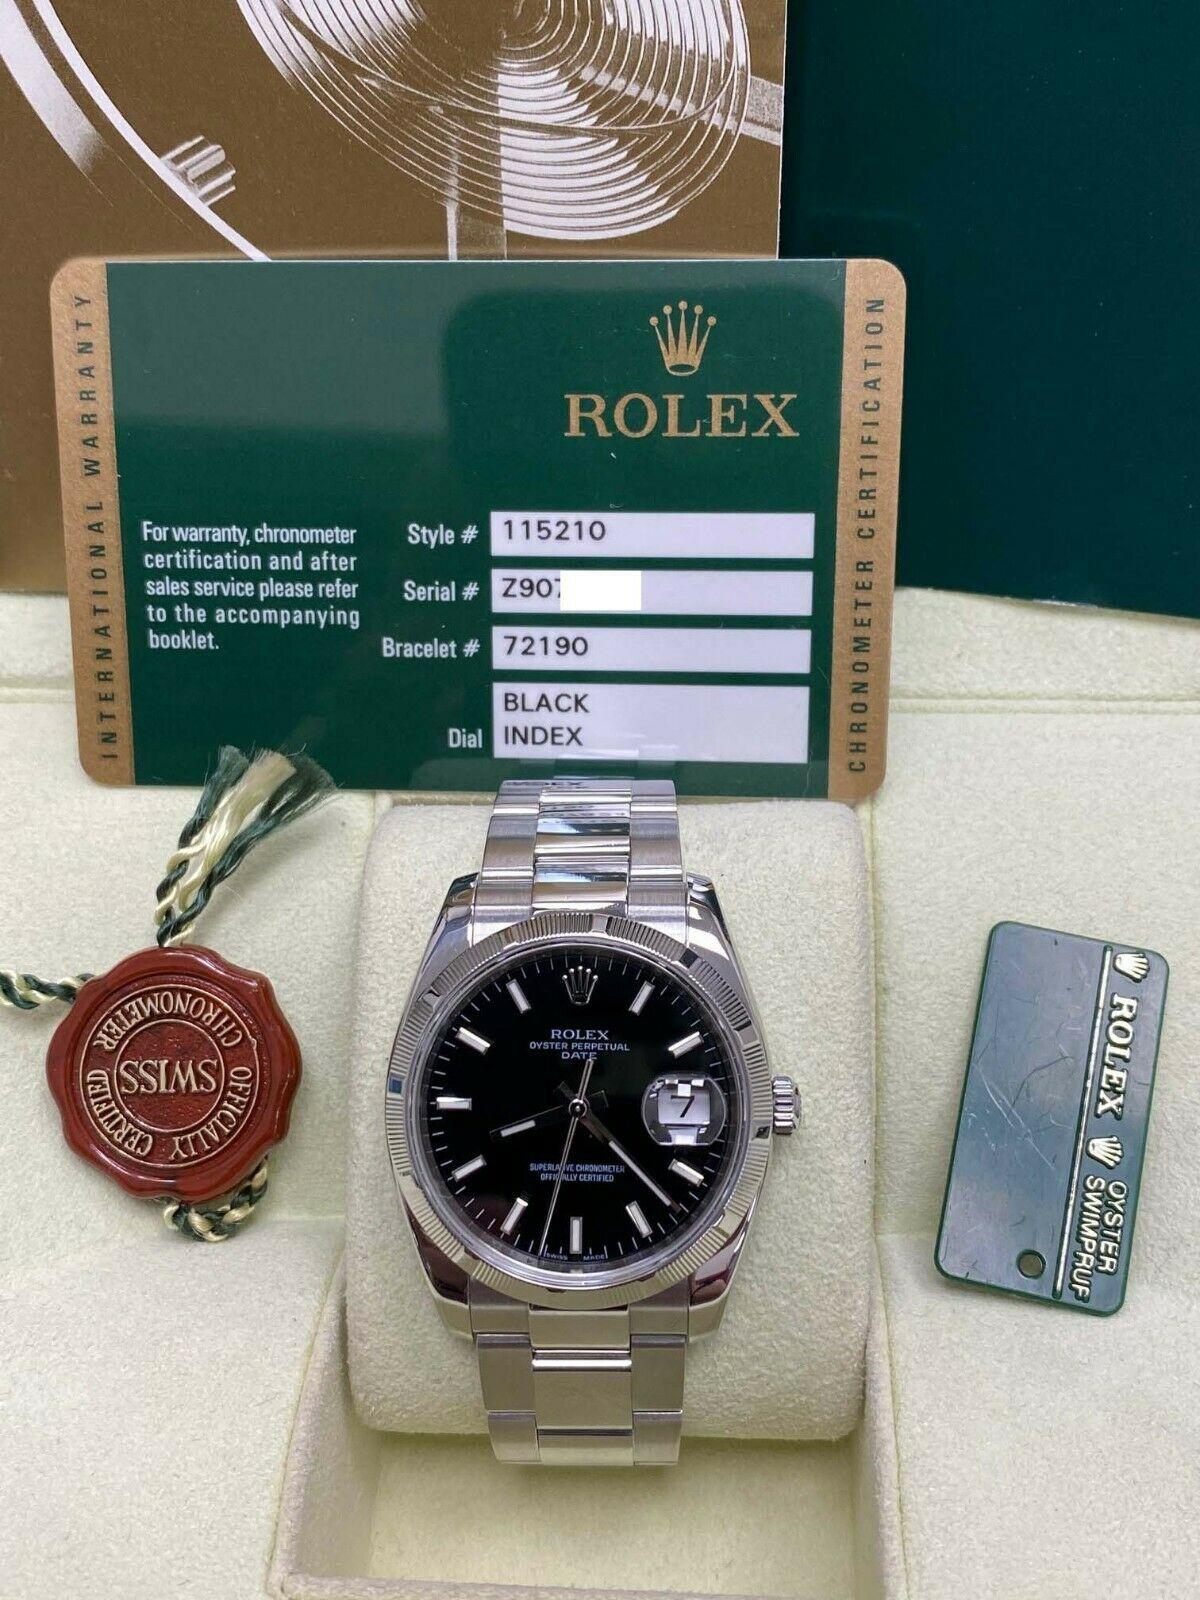 Style Number: 115210

 

Serial: Z907***


Year: 2011

 

Model: Date

 

Case Material: Stainless Steel

 

Band: Stainless Steel

 

Bezel:  Stainless Steel

 

Dial: Black

 

Face: Sapphire Crystal 

 

Case Size: 34mm

 

Includes: 

-Rolex Box